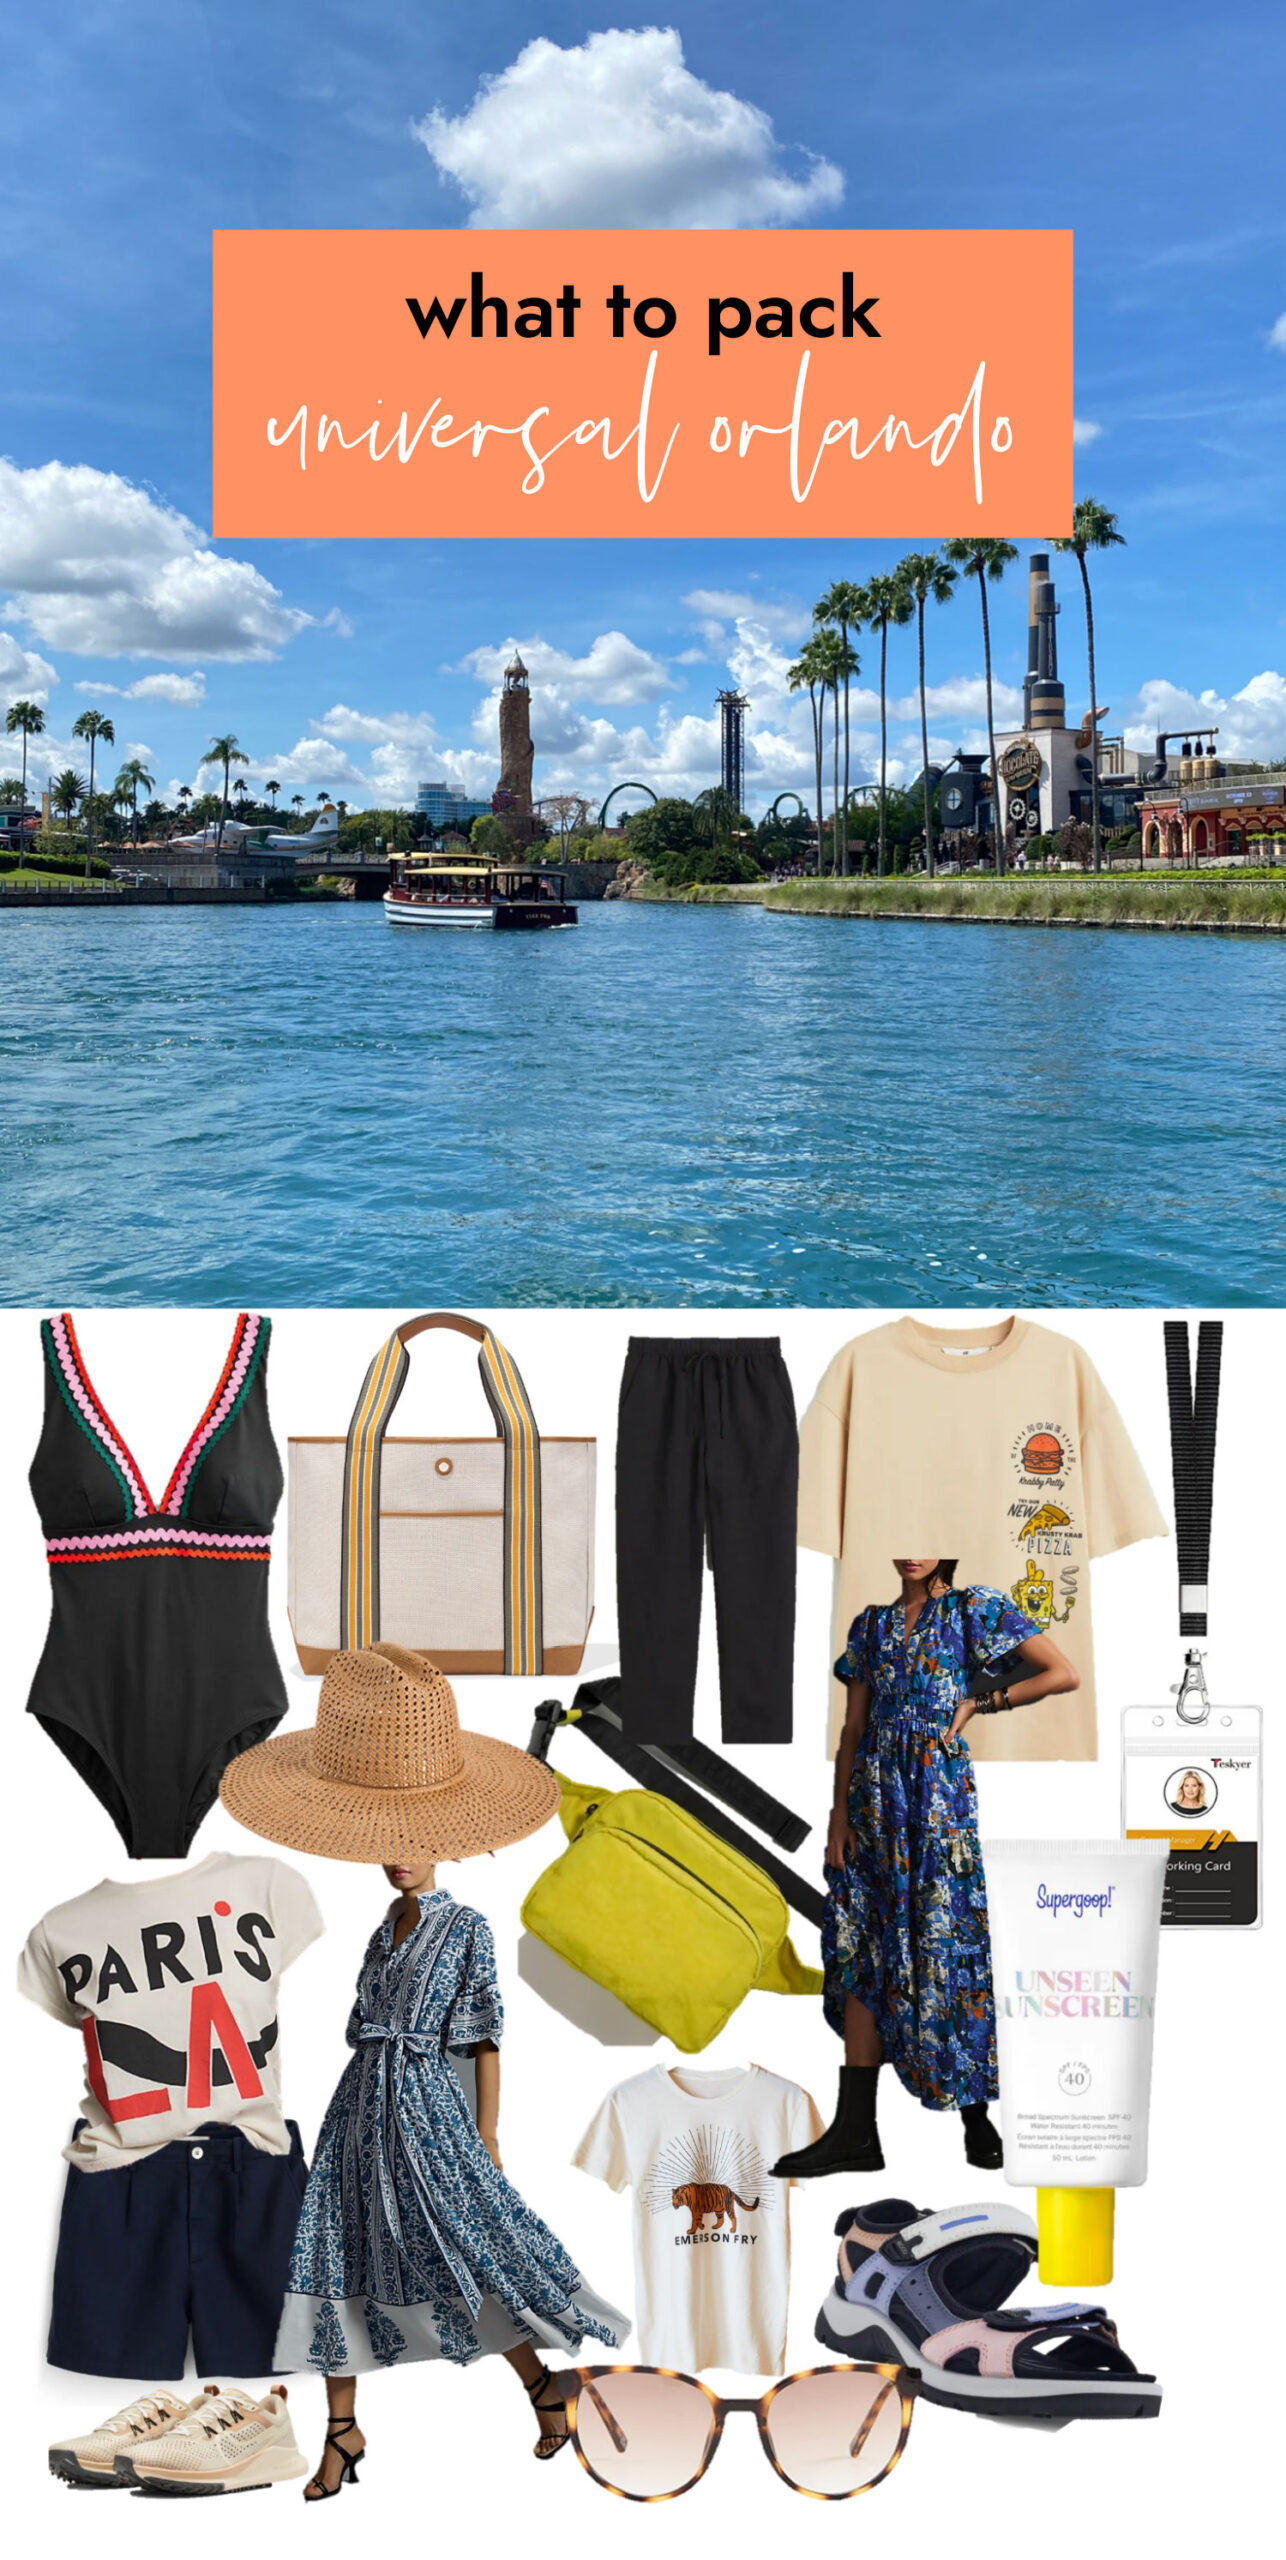 Universal Studios packing list, what to pack for Universal Studios Orlando